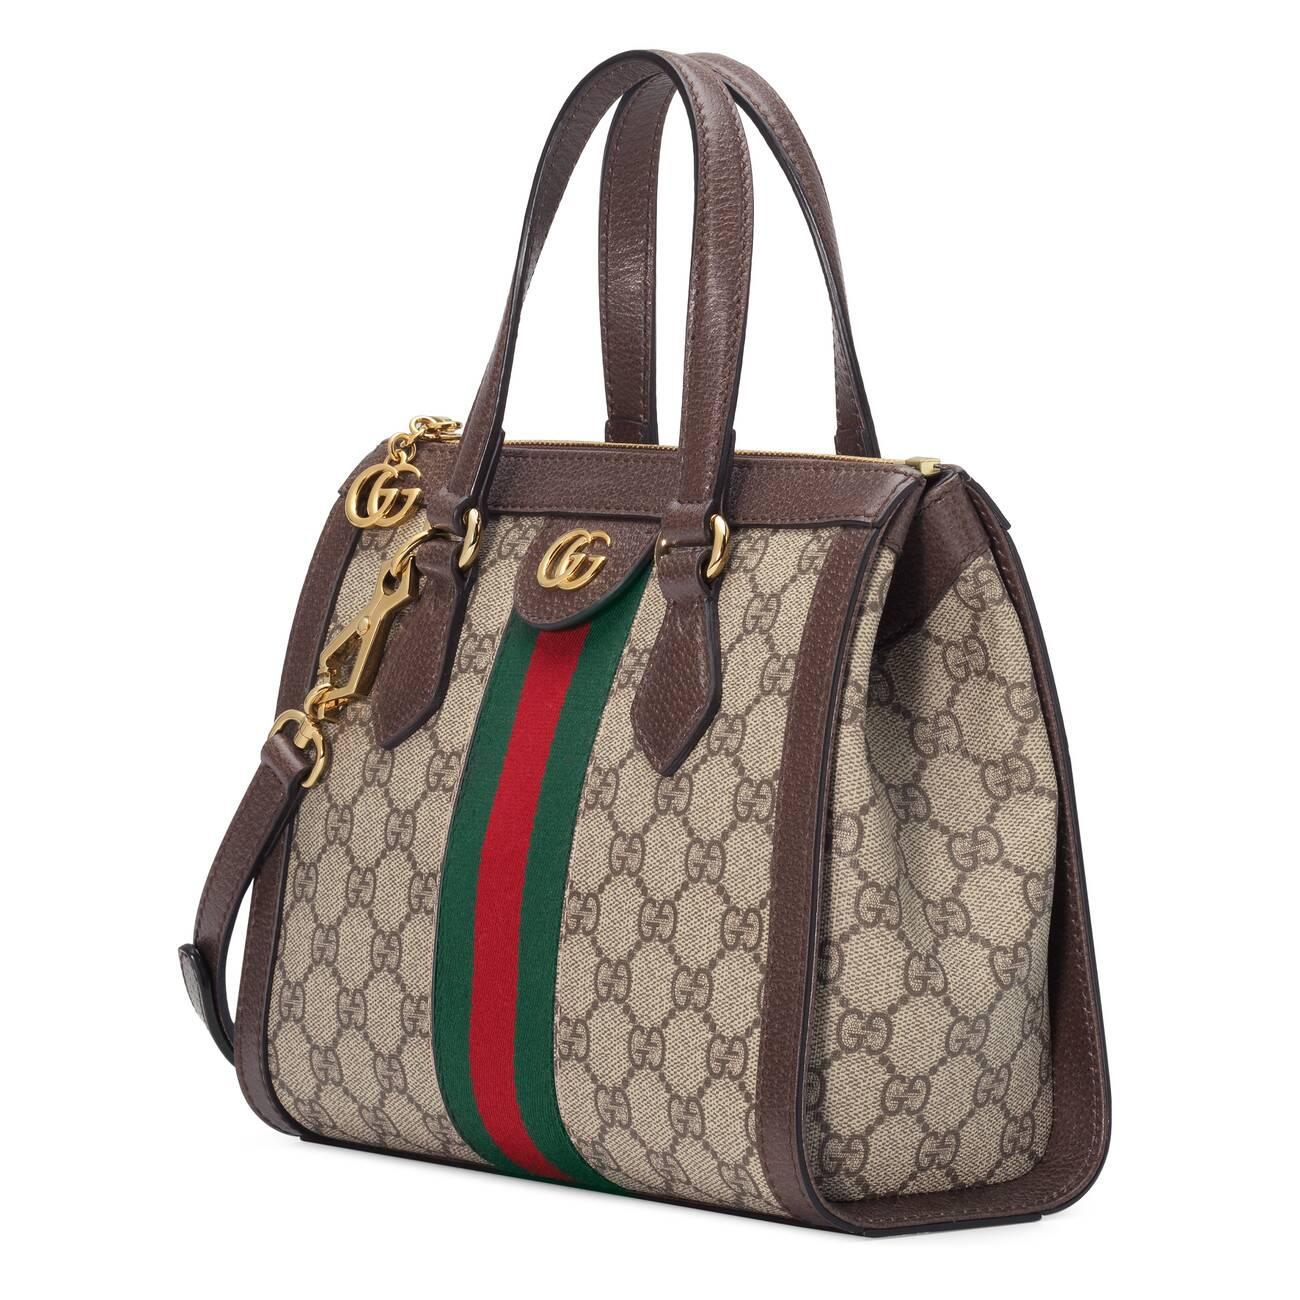 Gucci Canvas Ophidia Small GG Tote Bag in Green - Lyst